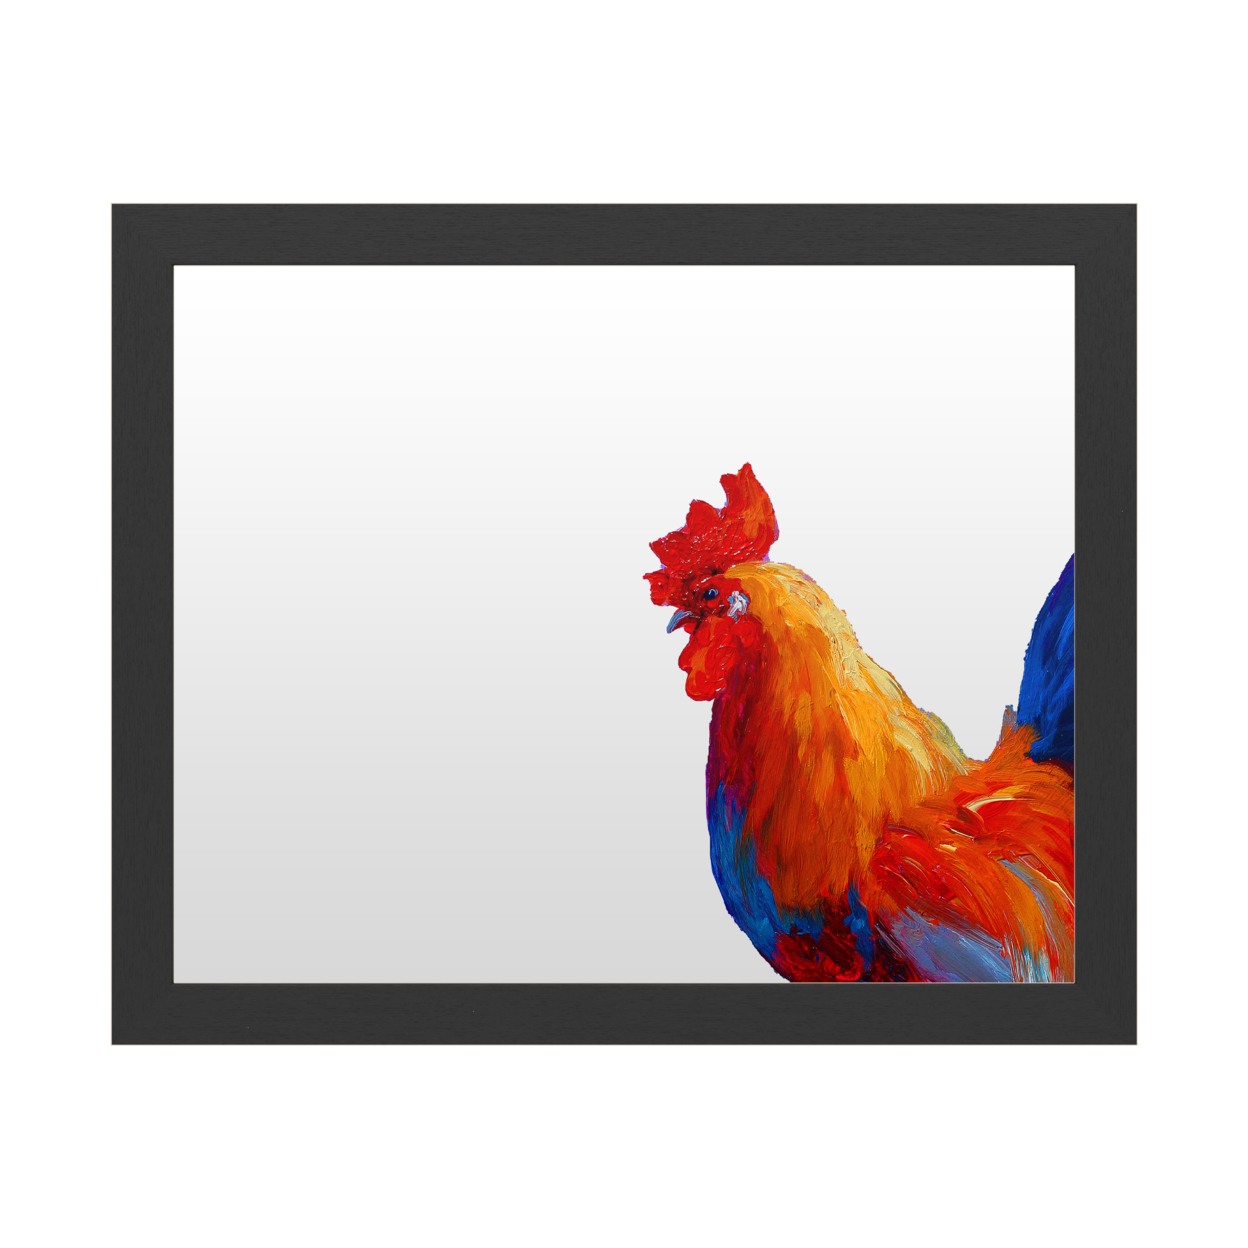 Dry Erase 16 X 20 Marker Board With Printed Artwork - Marion Rose Rooster Bob 1 White Board - Ready To Hang